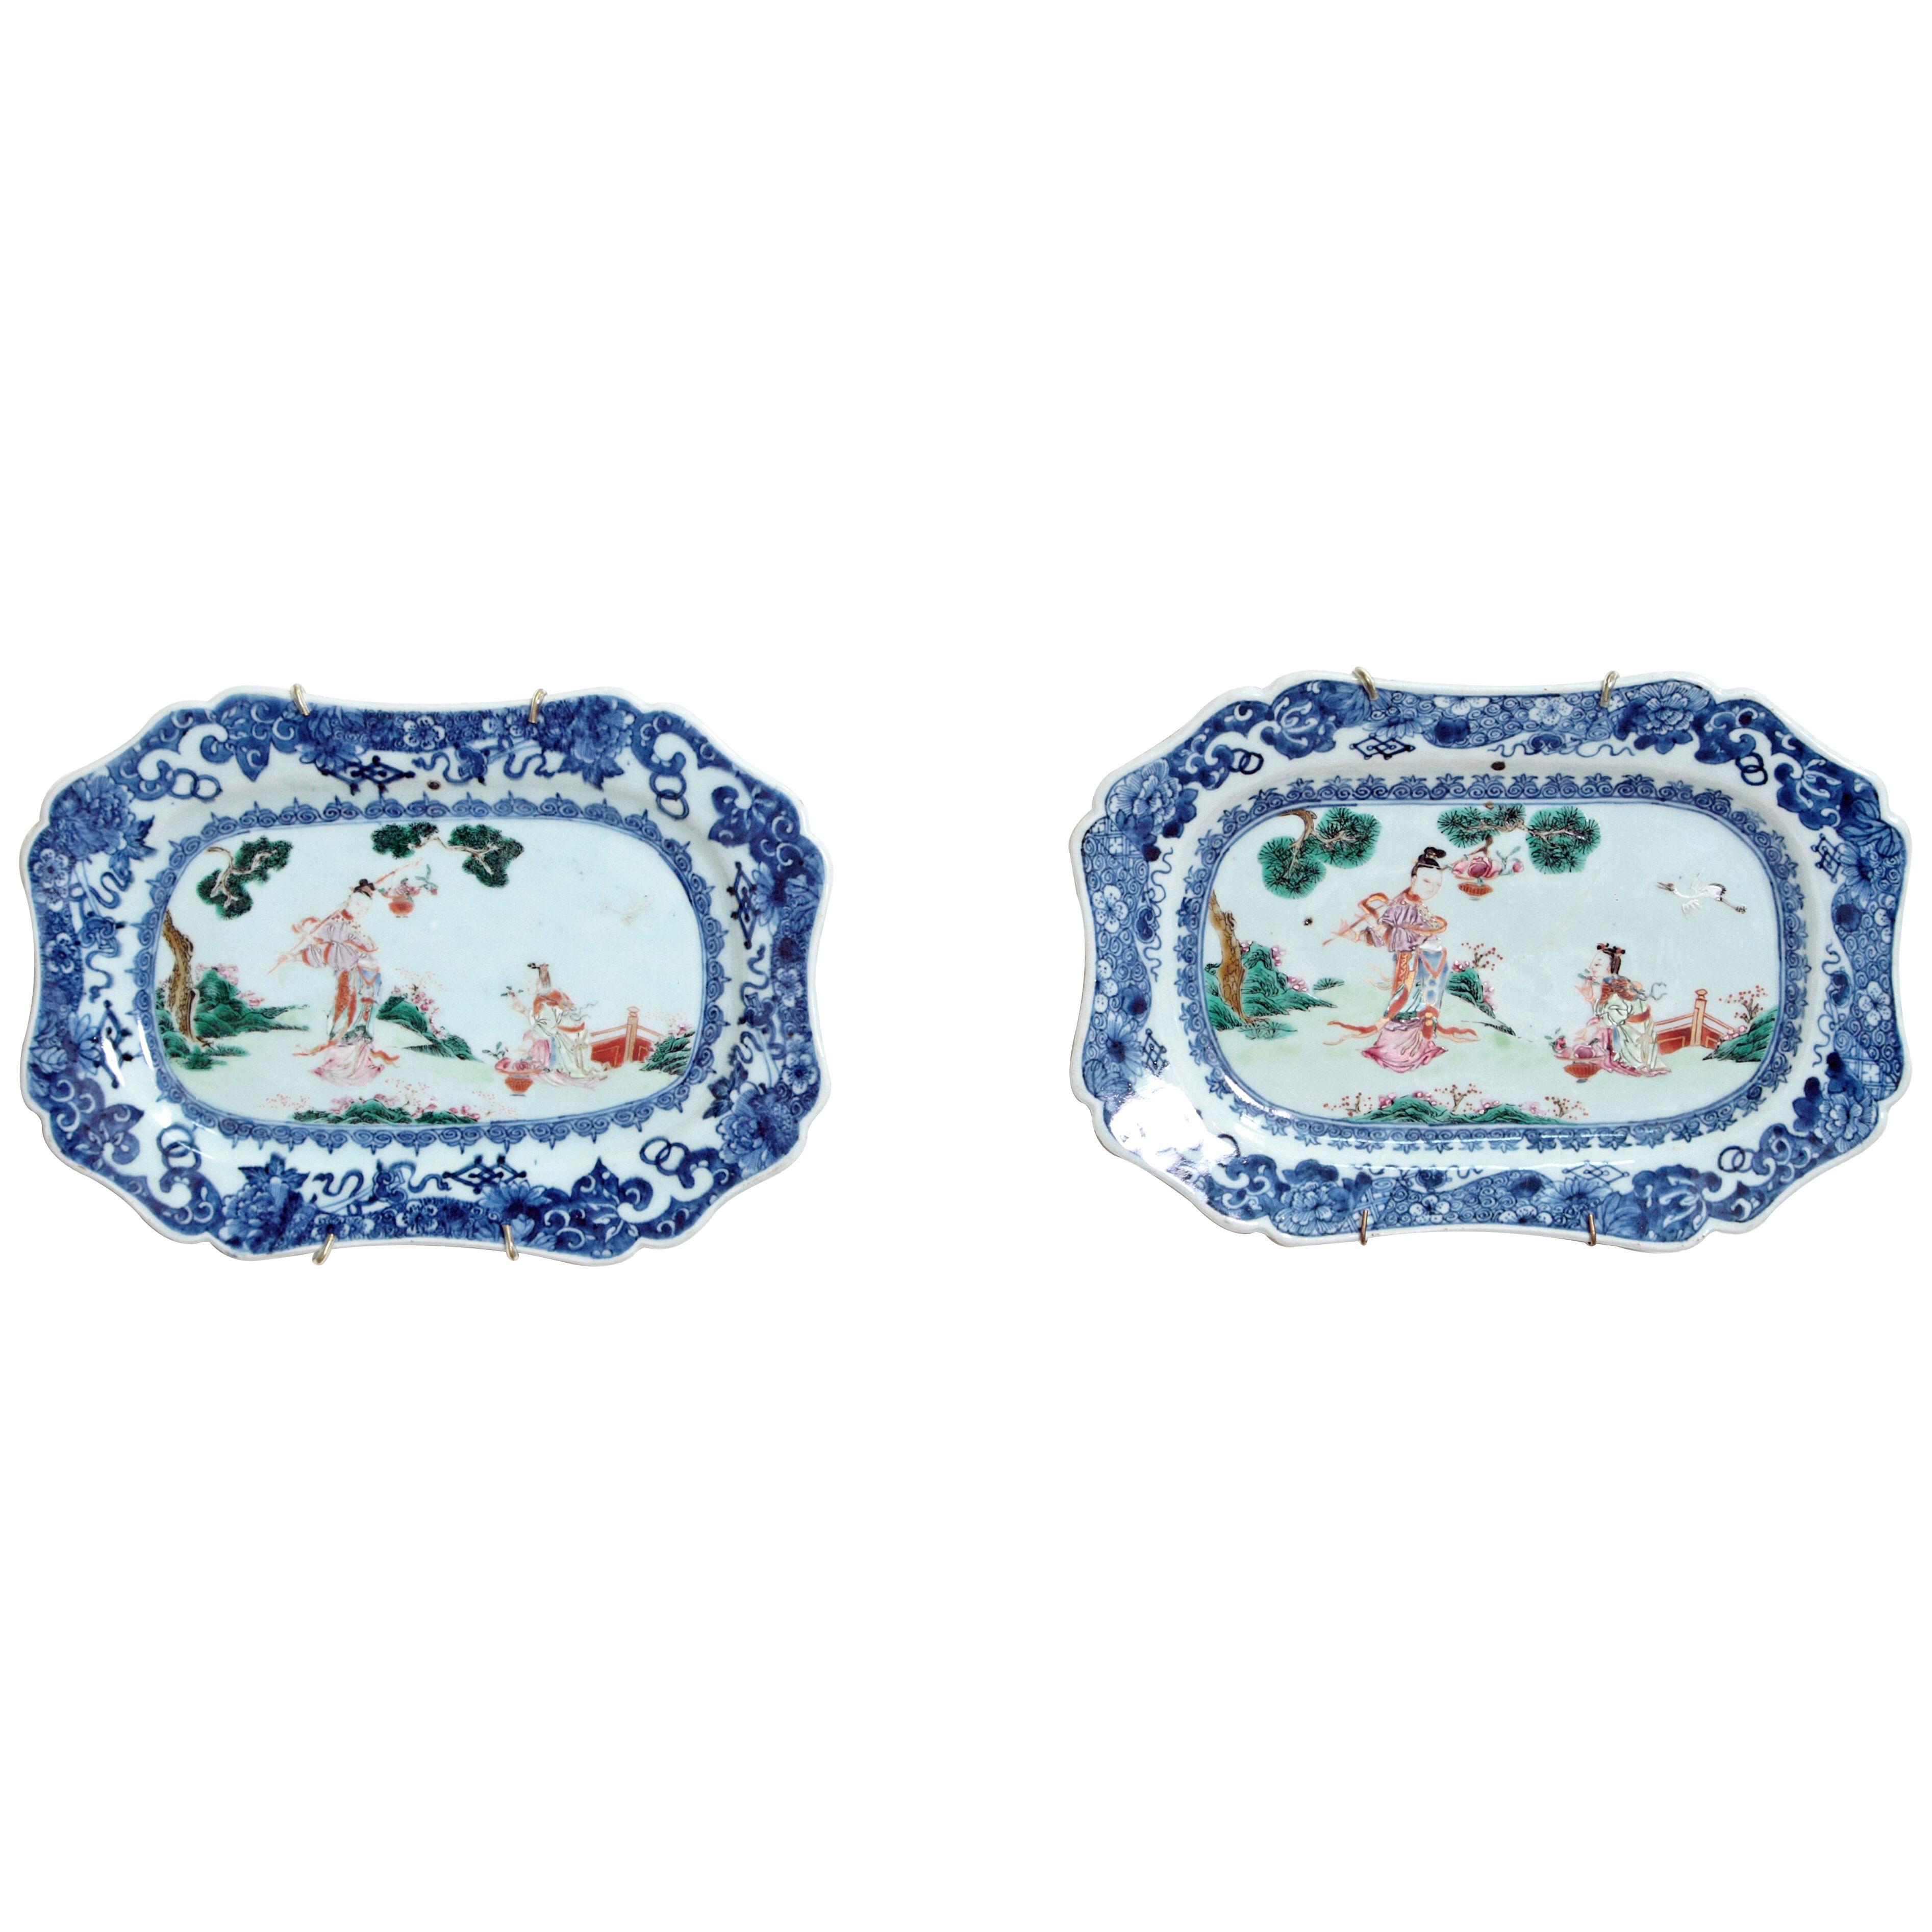 A Pair of 18th Century Chinese Blue and White Porcelain Platters